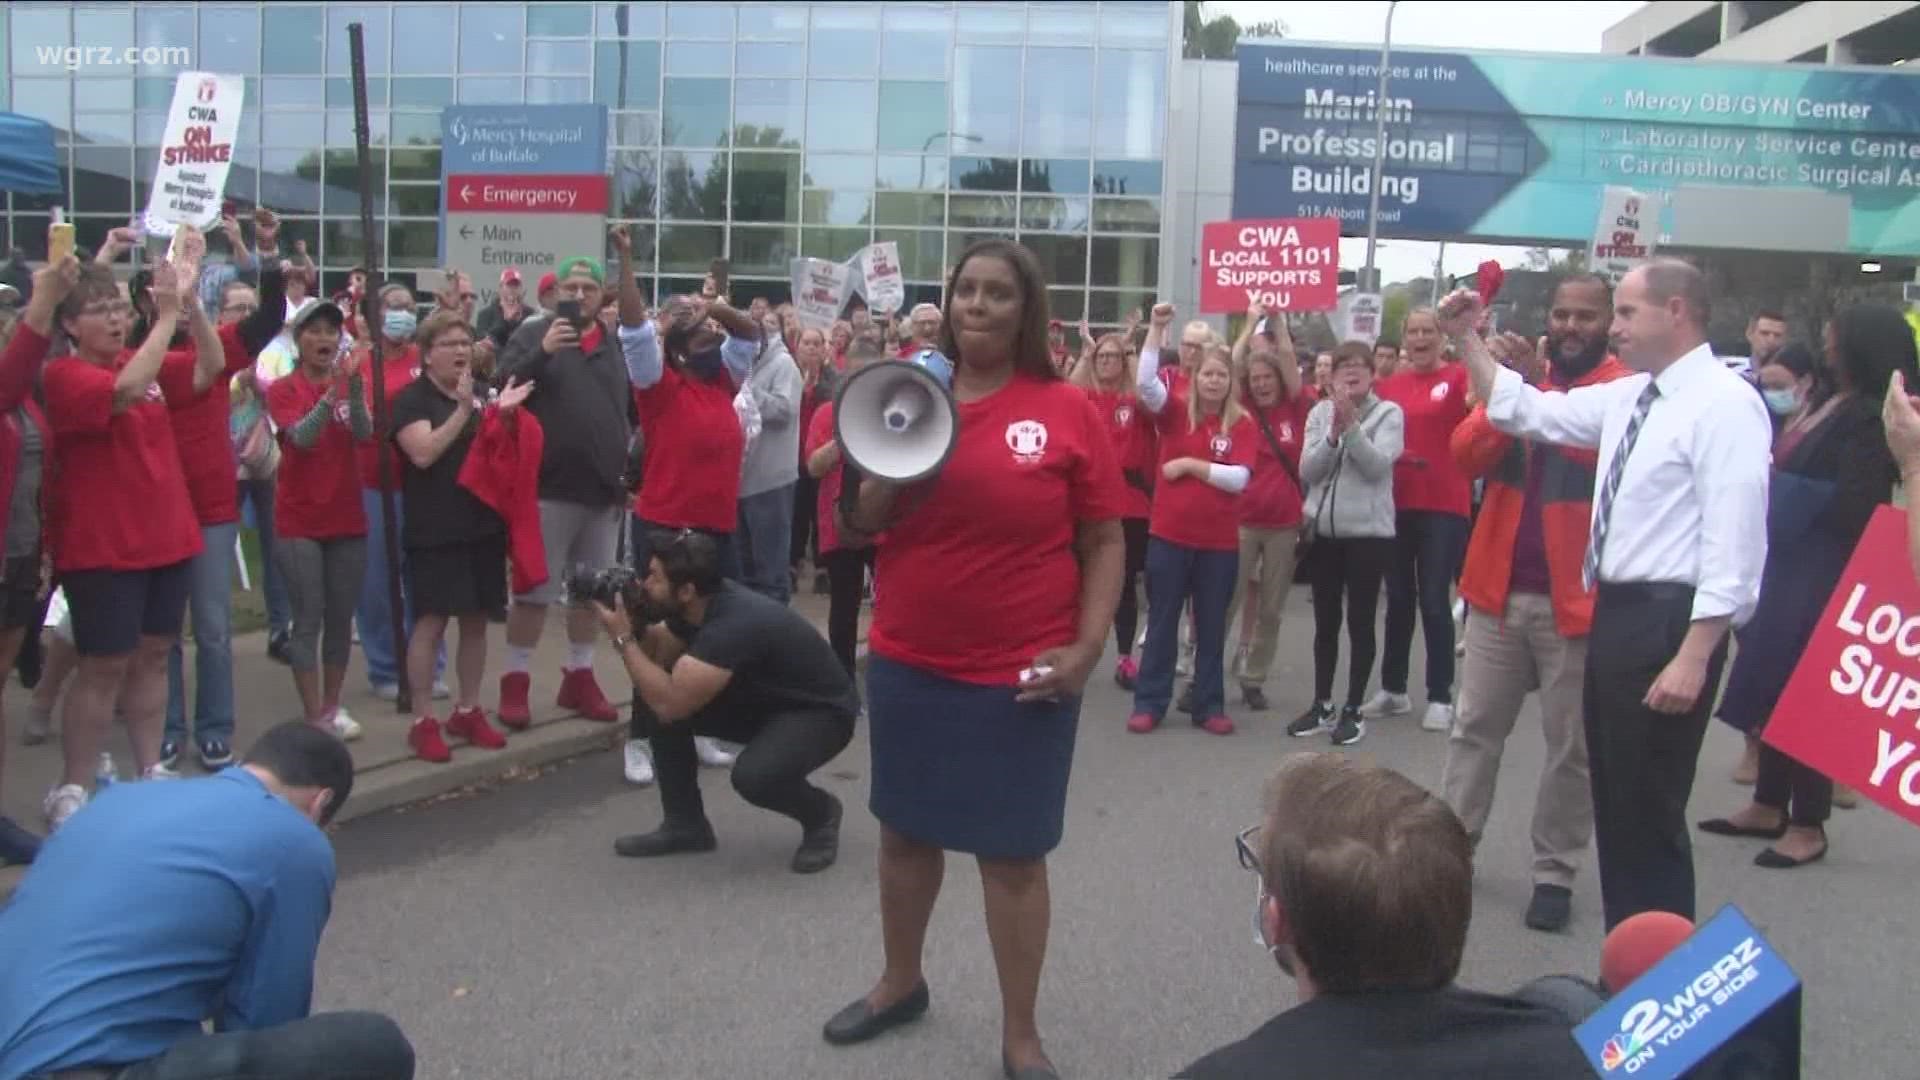 Letitia James remarks to union workers outside Mercy Hospital was pro-union